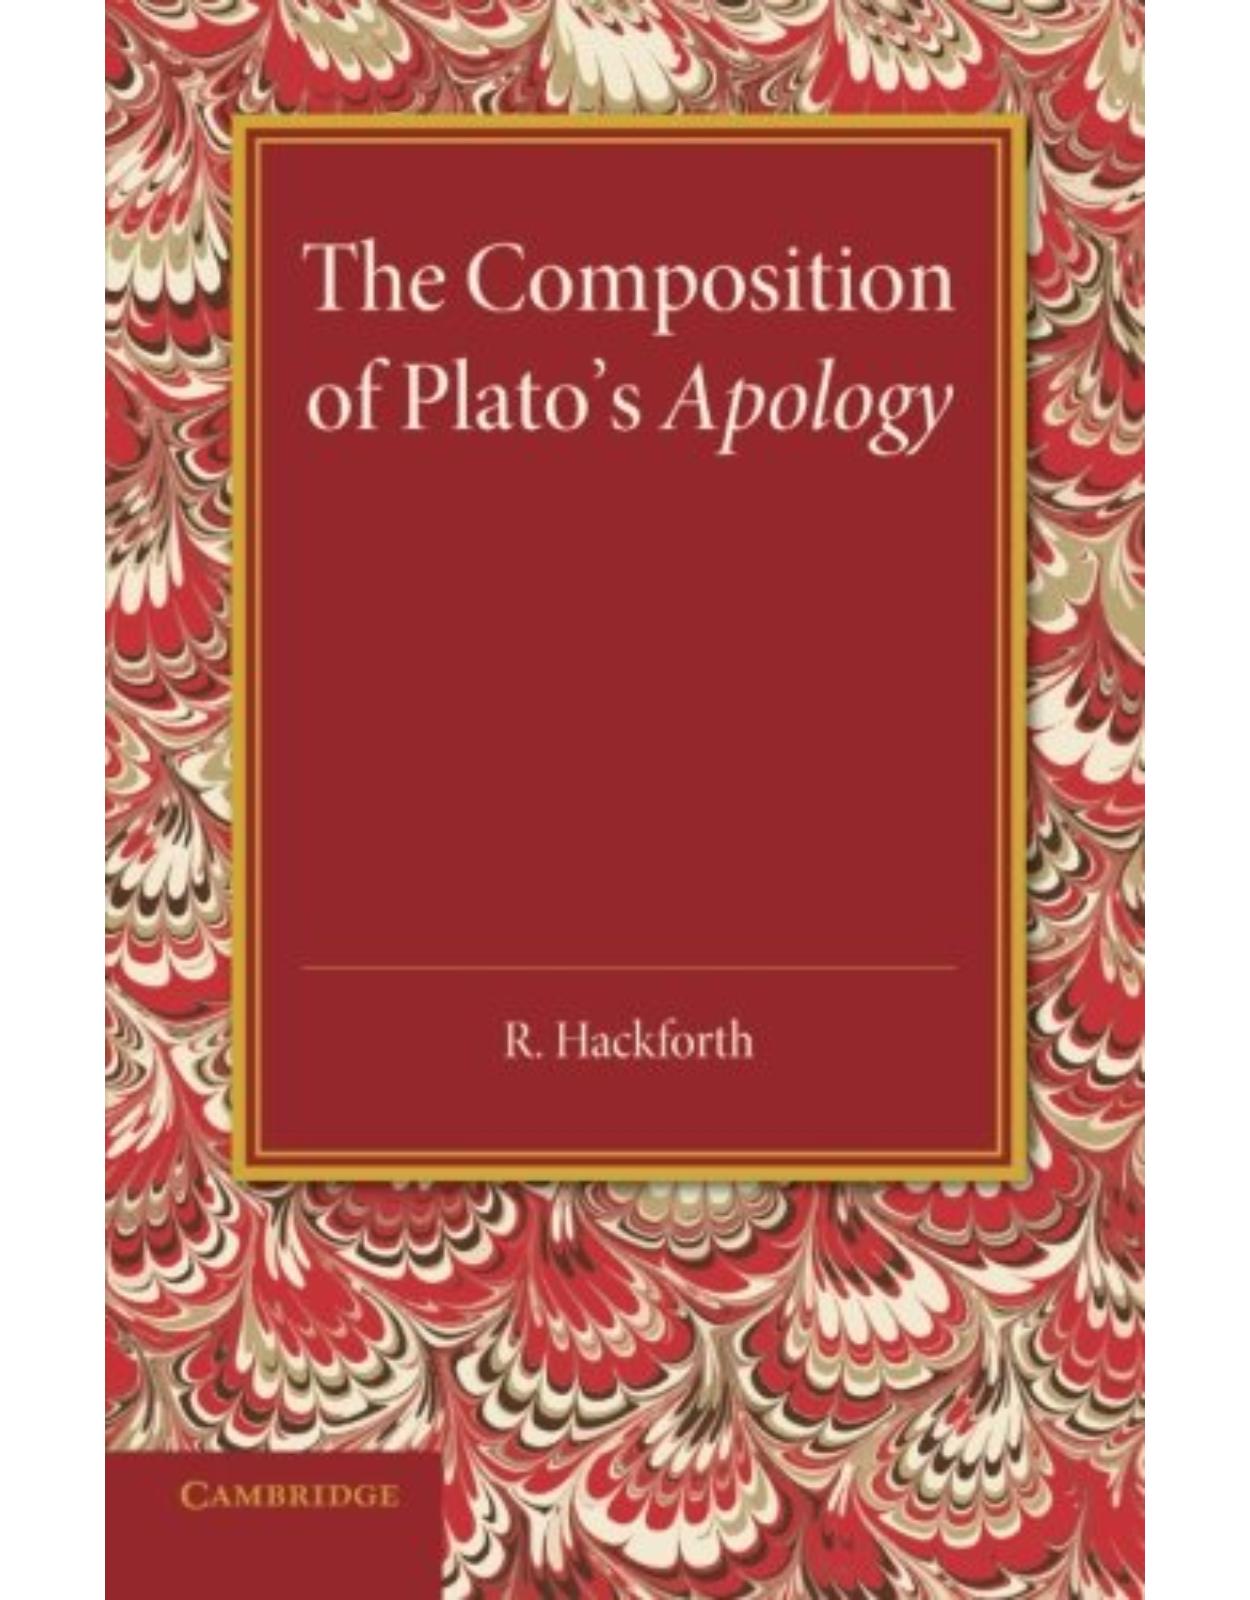 The Composition of Plato's Apology